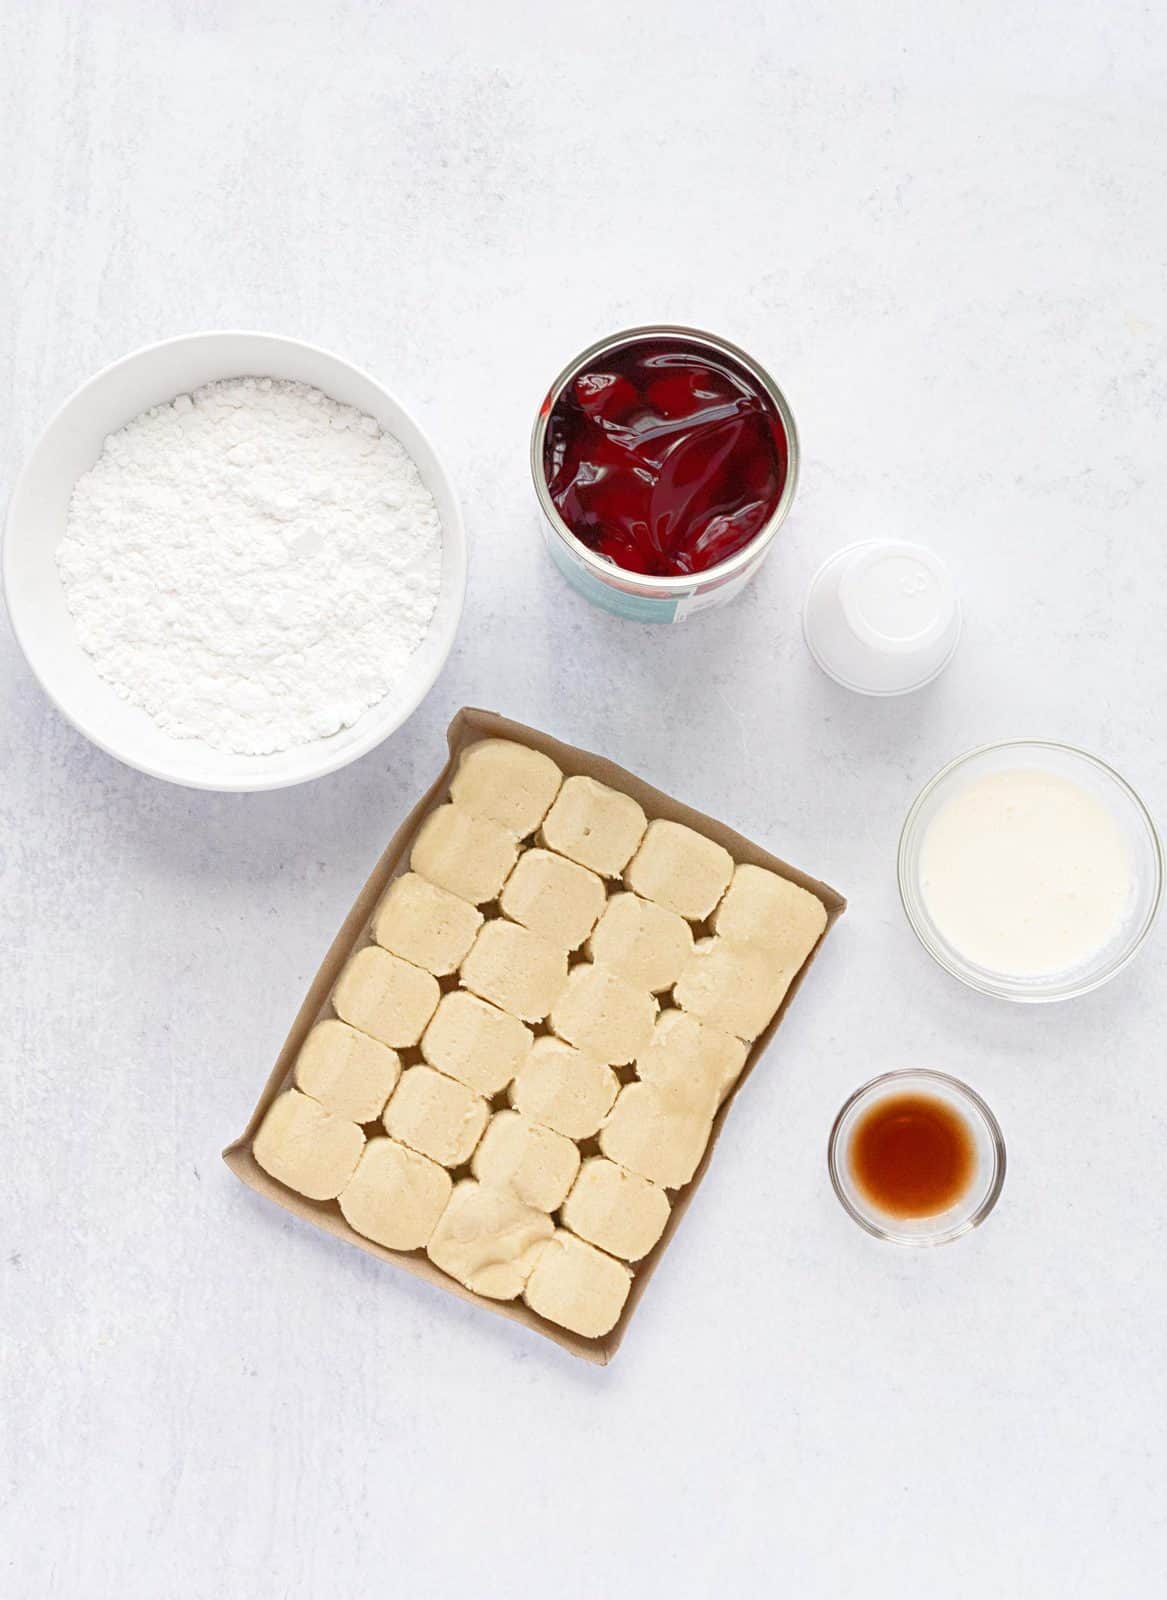 Ingredients needed: sugar cookie dough, strawberry pie filling, powdered sugar, heavy cream and vanilla extract.